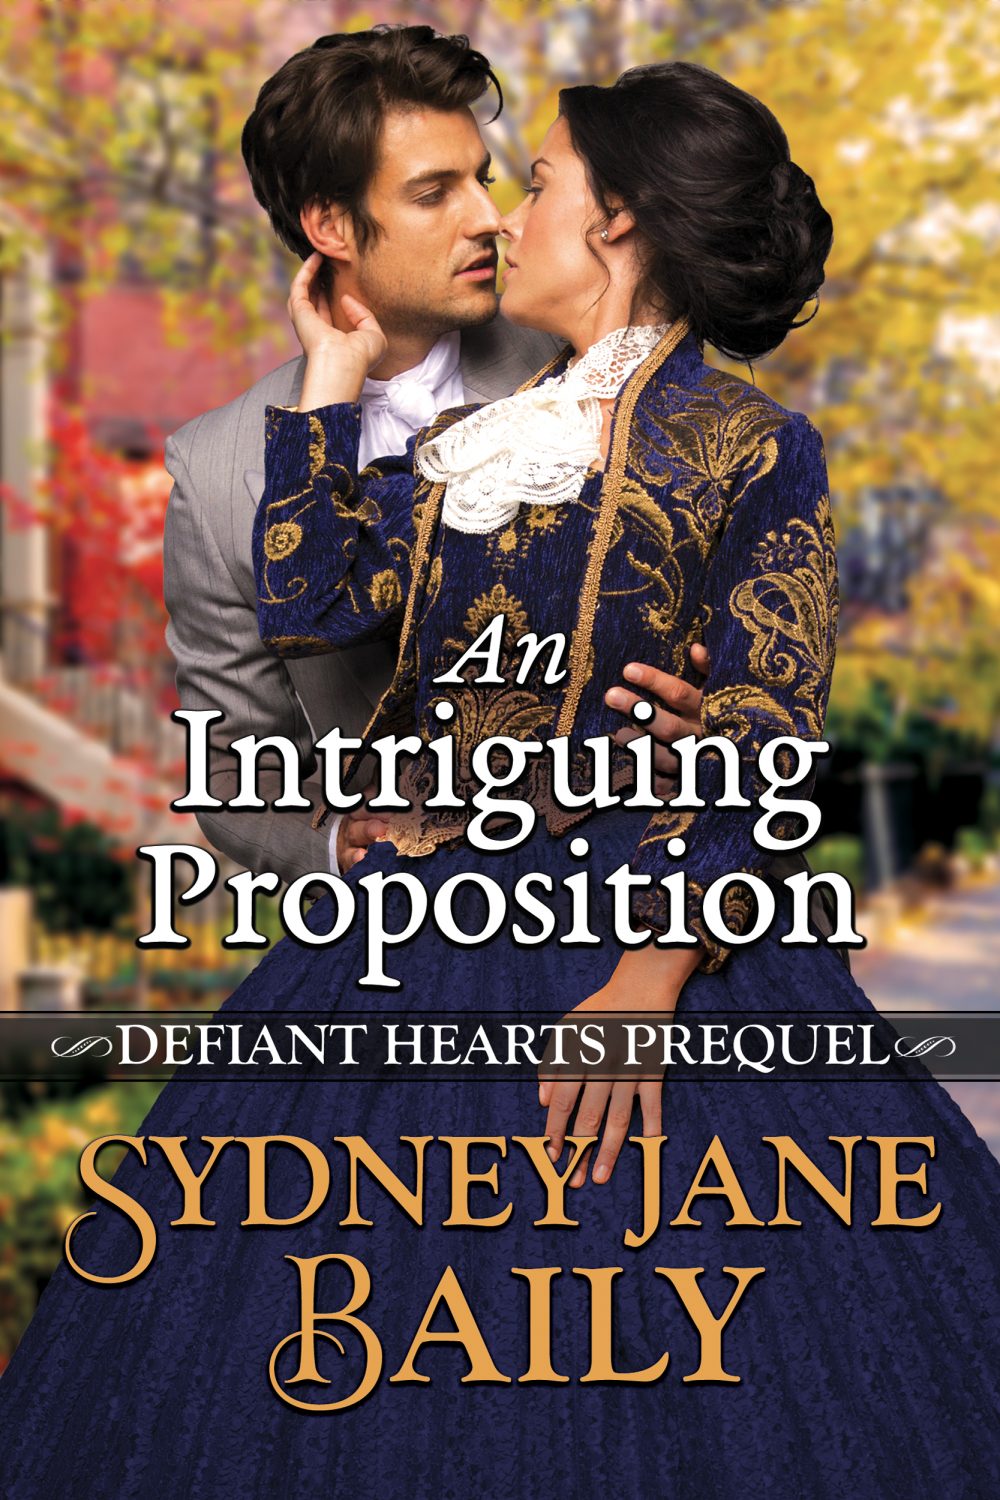 An Intriguing Proposition - Sydney Jane Baily